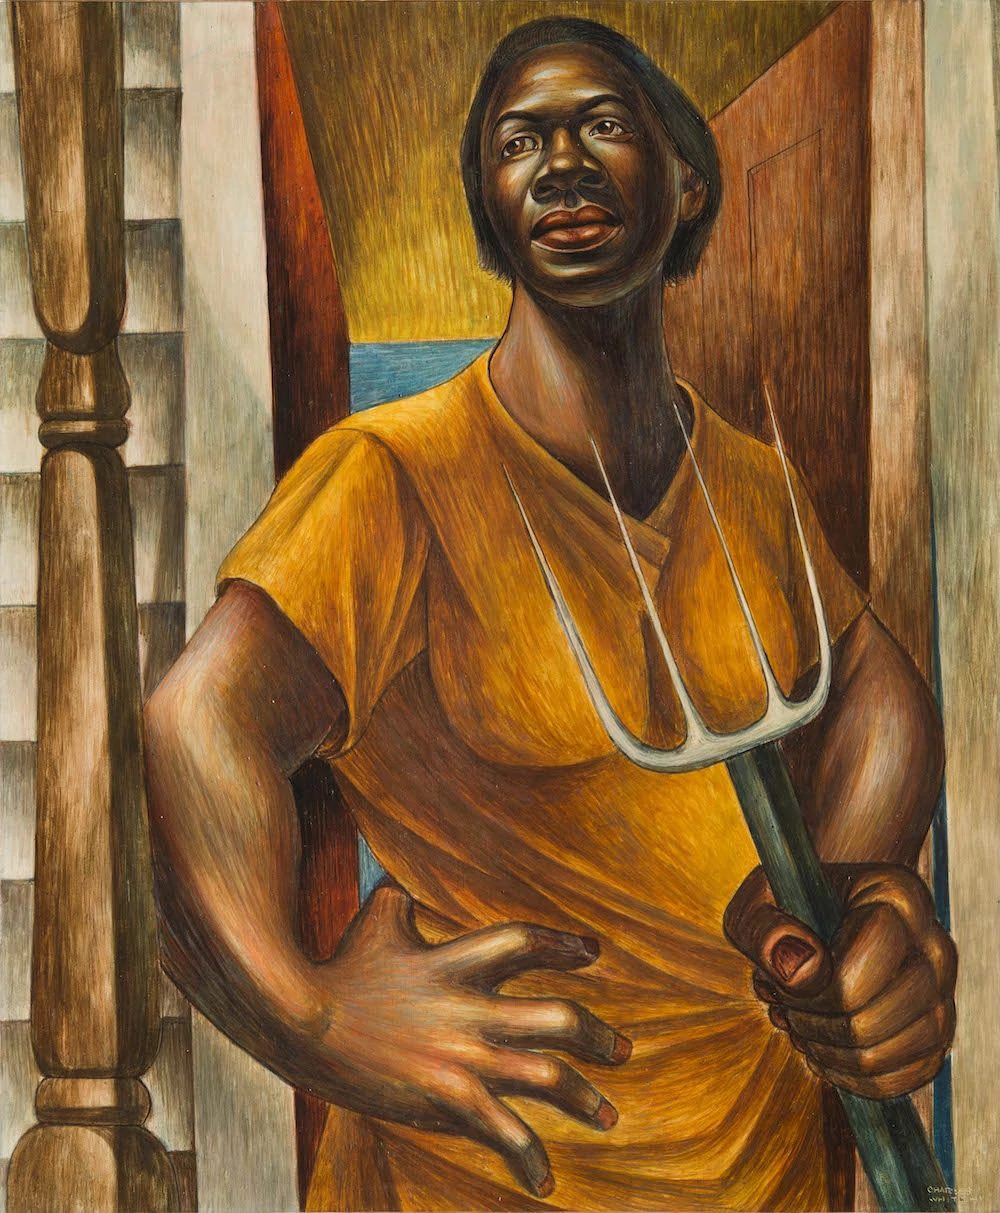 Our Land, Charles White